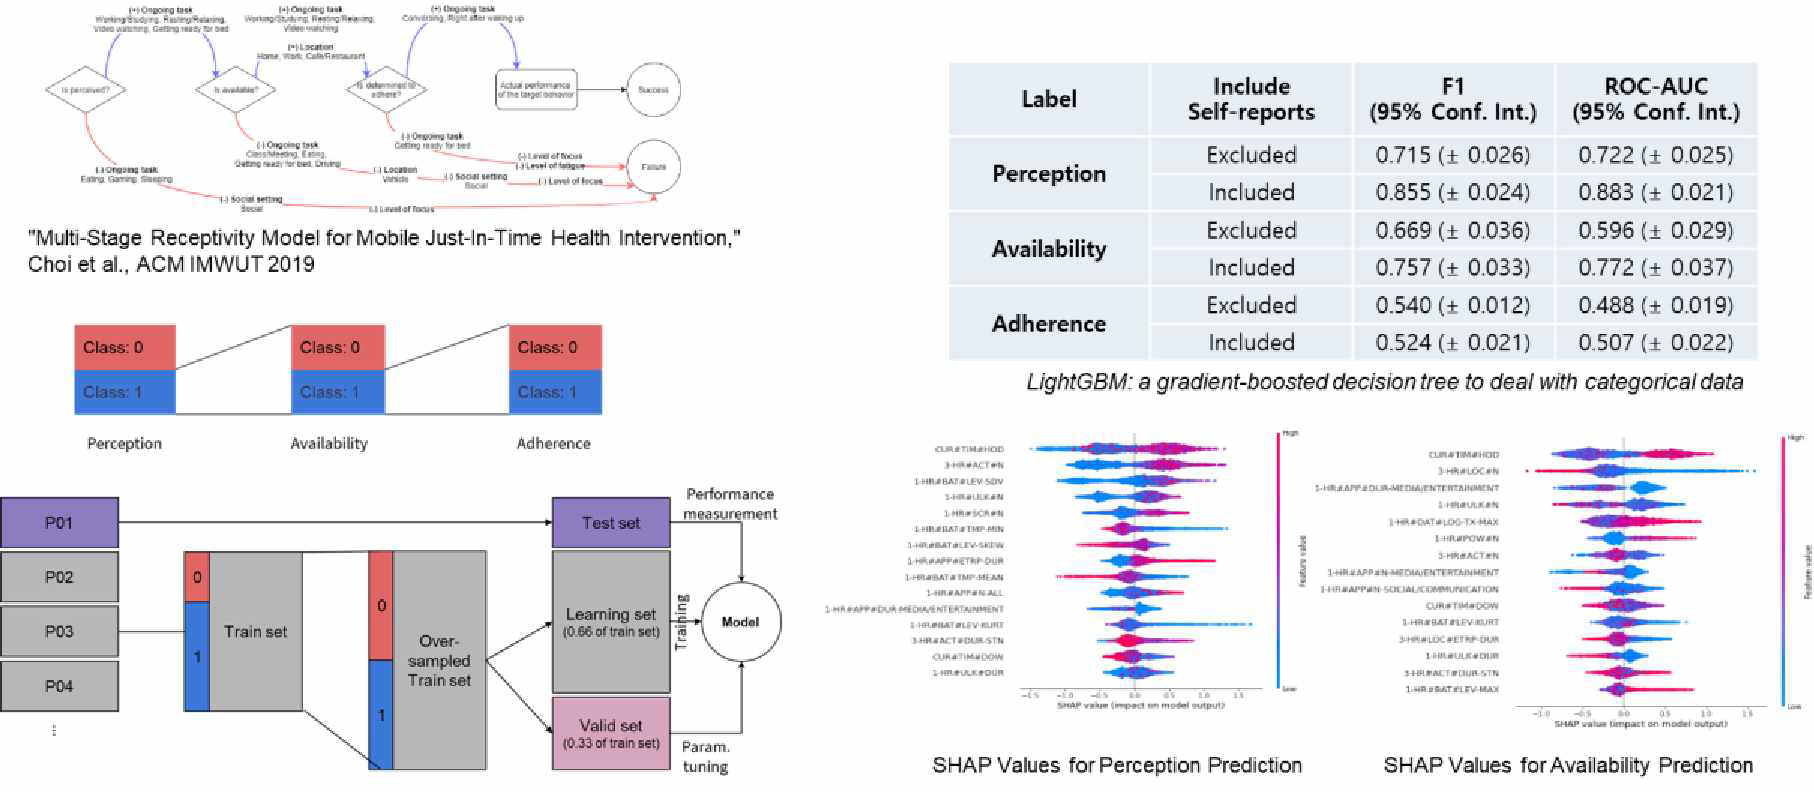 Results of Perception, Availability, and Adherence Classification